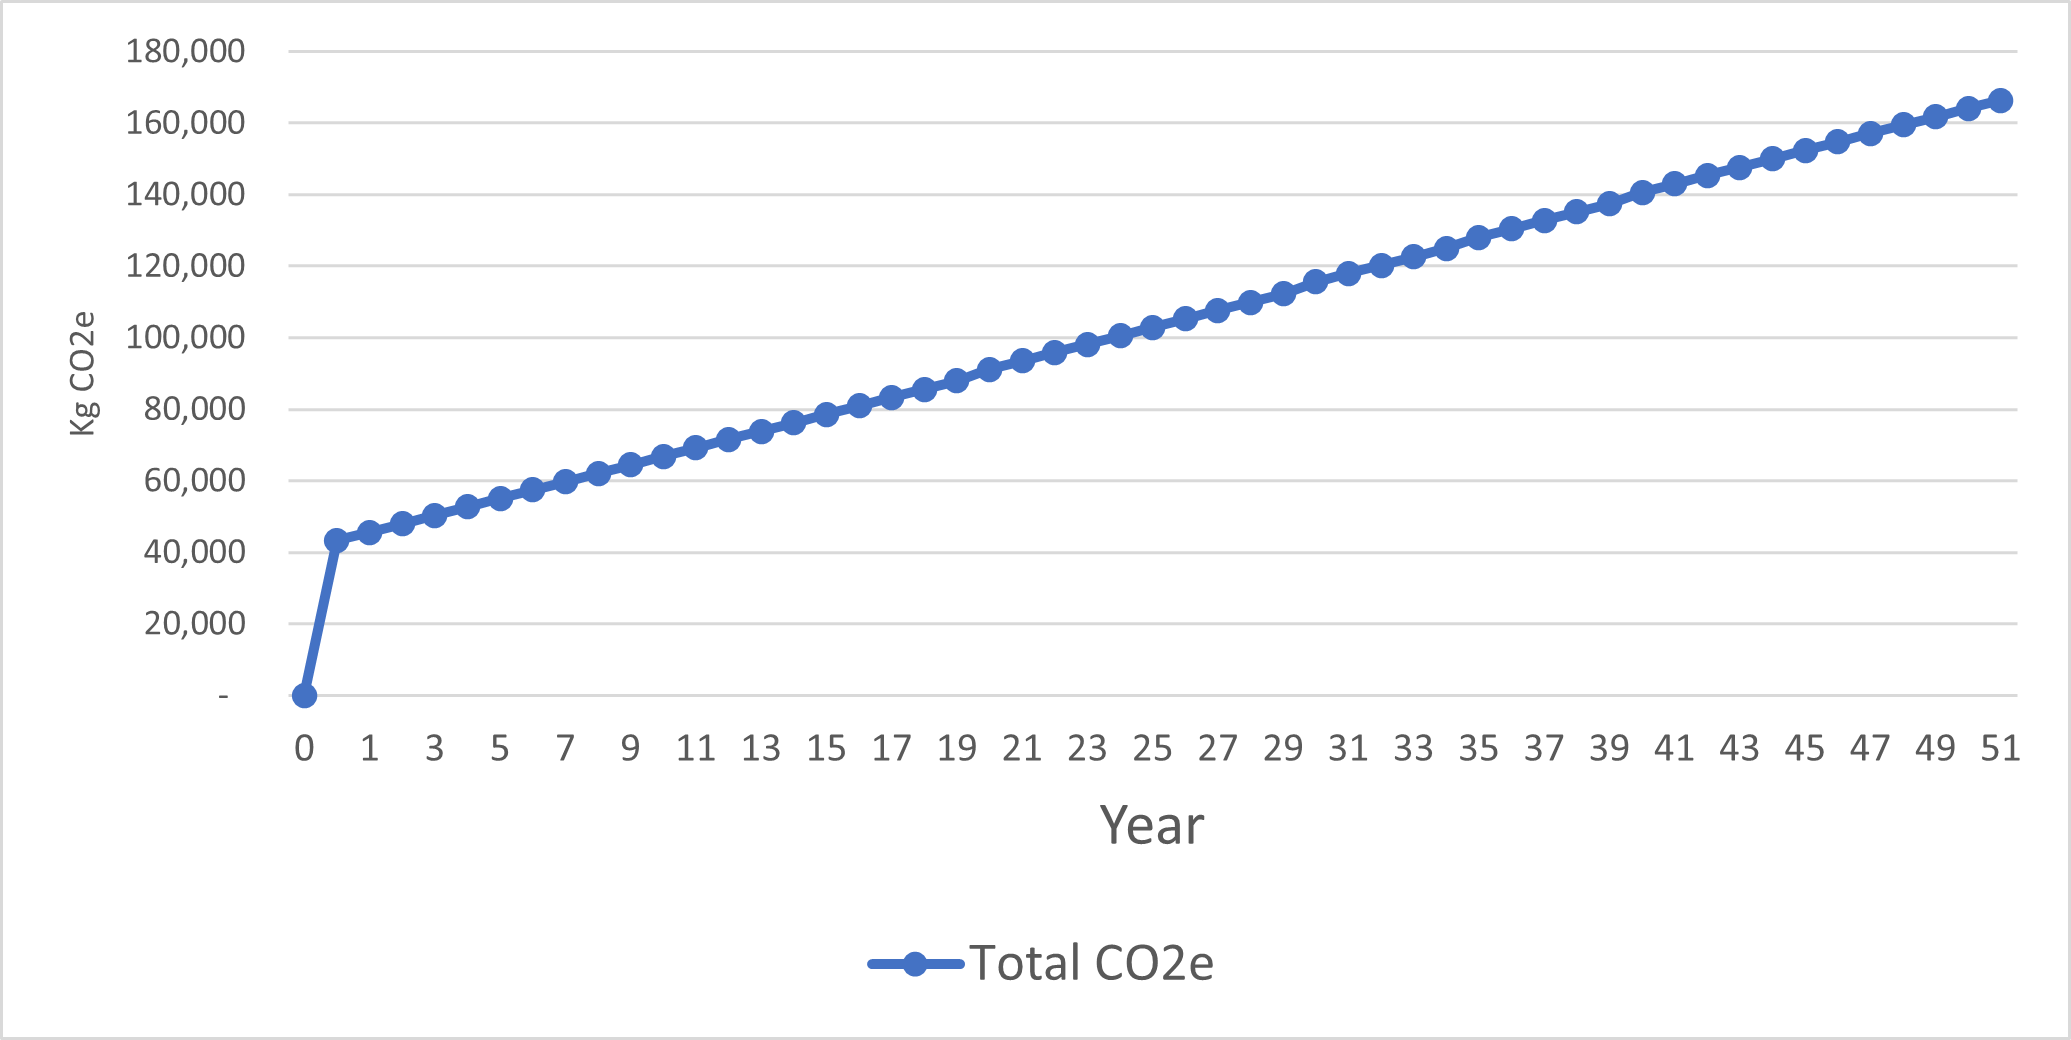 The same emissions over 50 years shown cumulatively